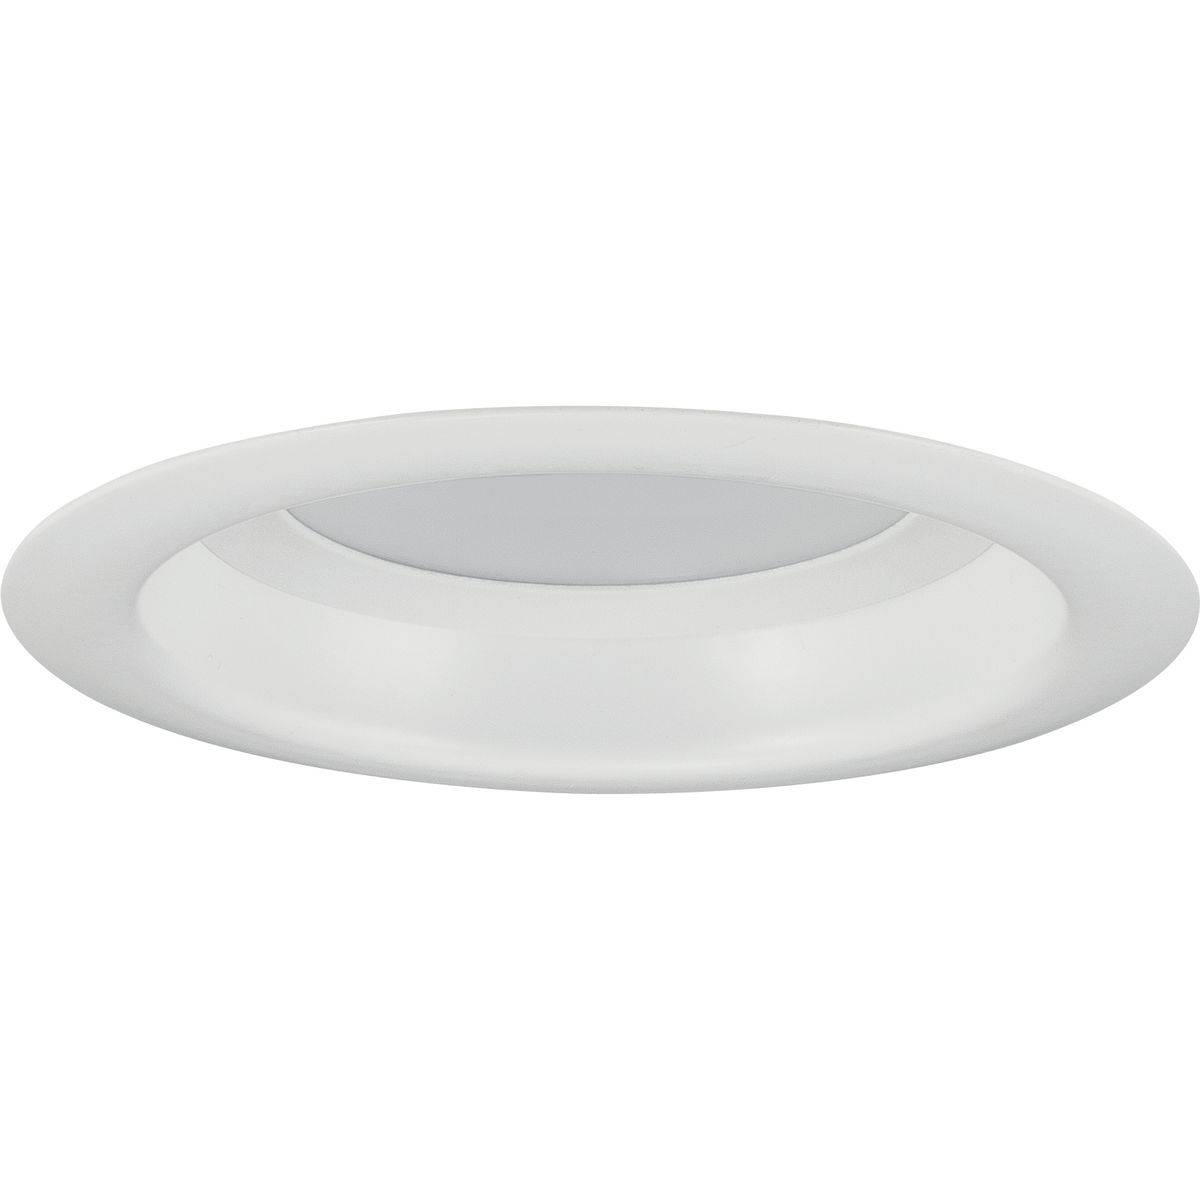 Progress Lighting® P8080-28-30K 1-Light Pre-Wired Recessed Trim, 4 in ID x 5 in OD, LED Lamp, For Use With 4 in Remodel Round Recessed Housing, Steel